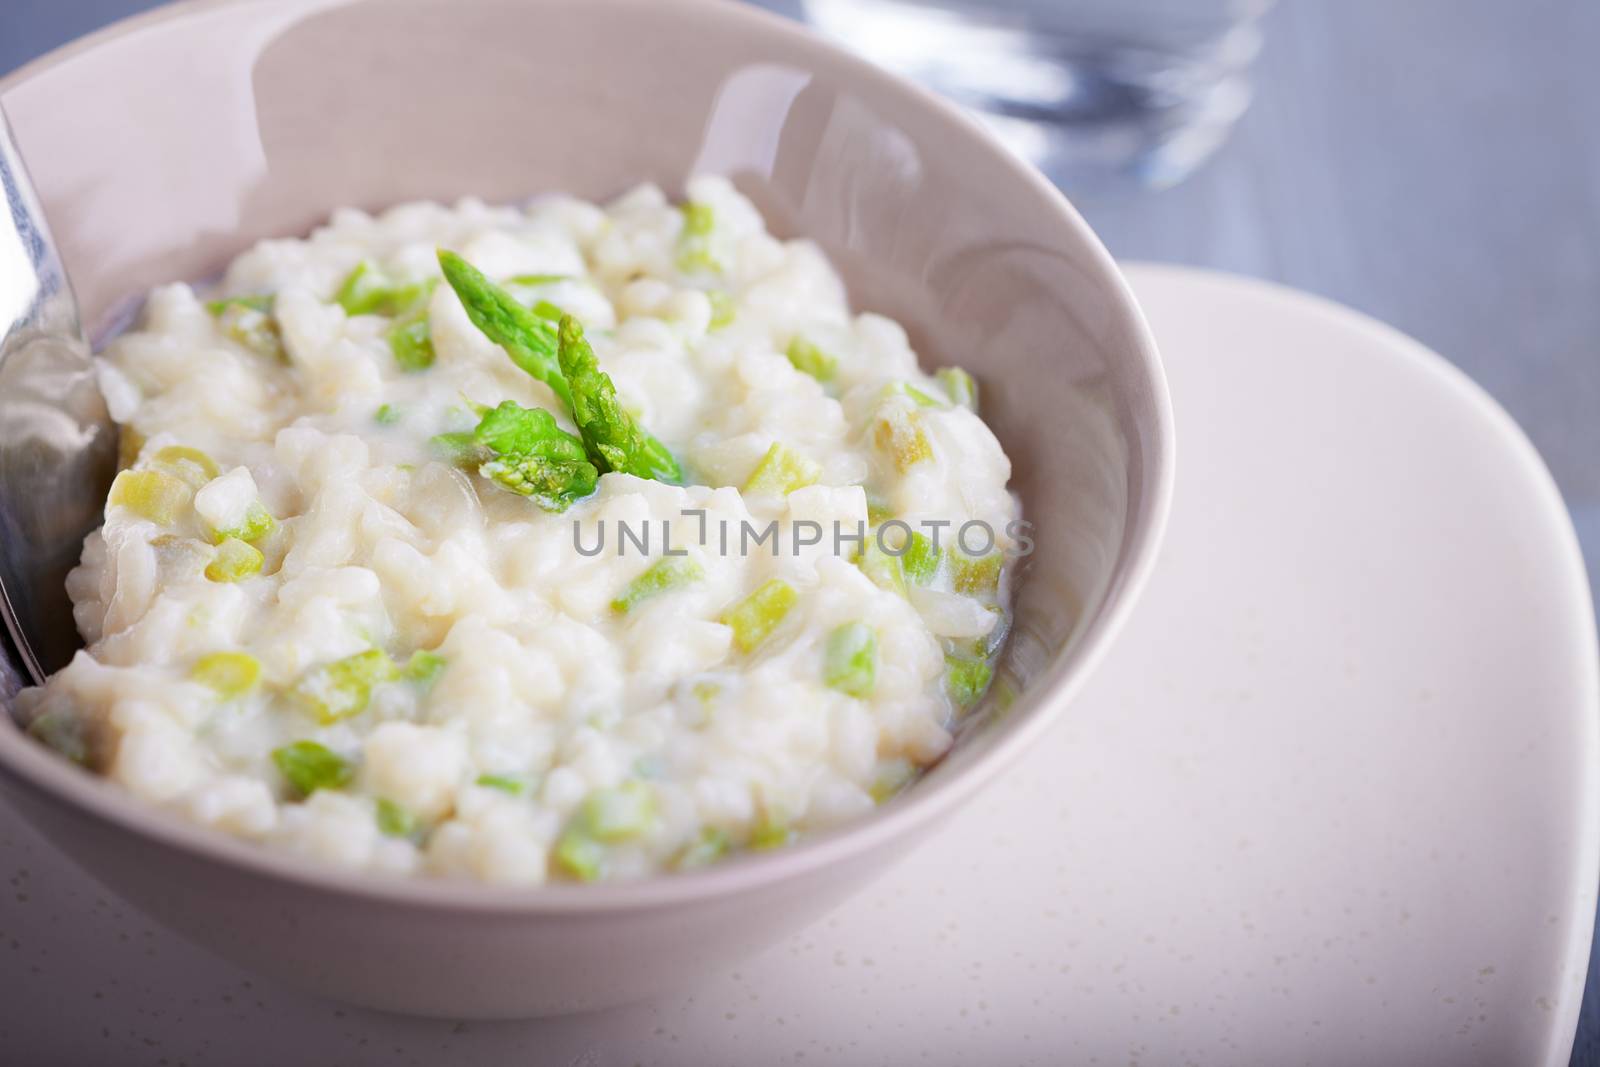 Risotto with Asparagus served in a white plate